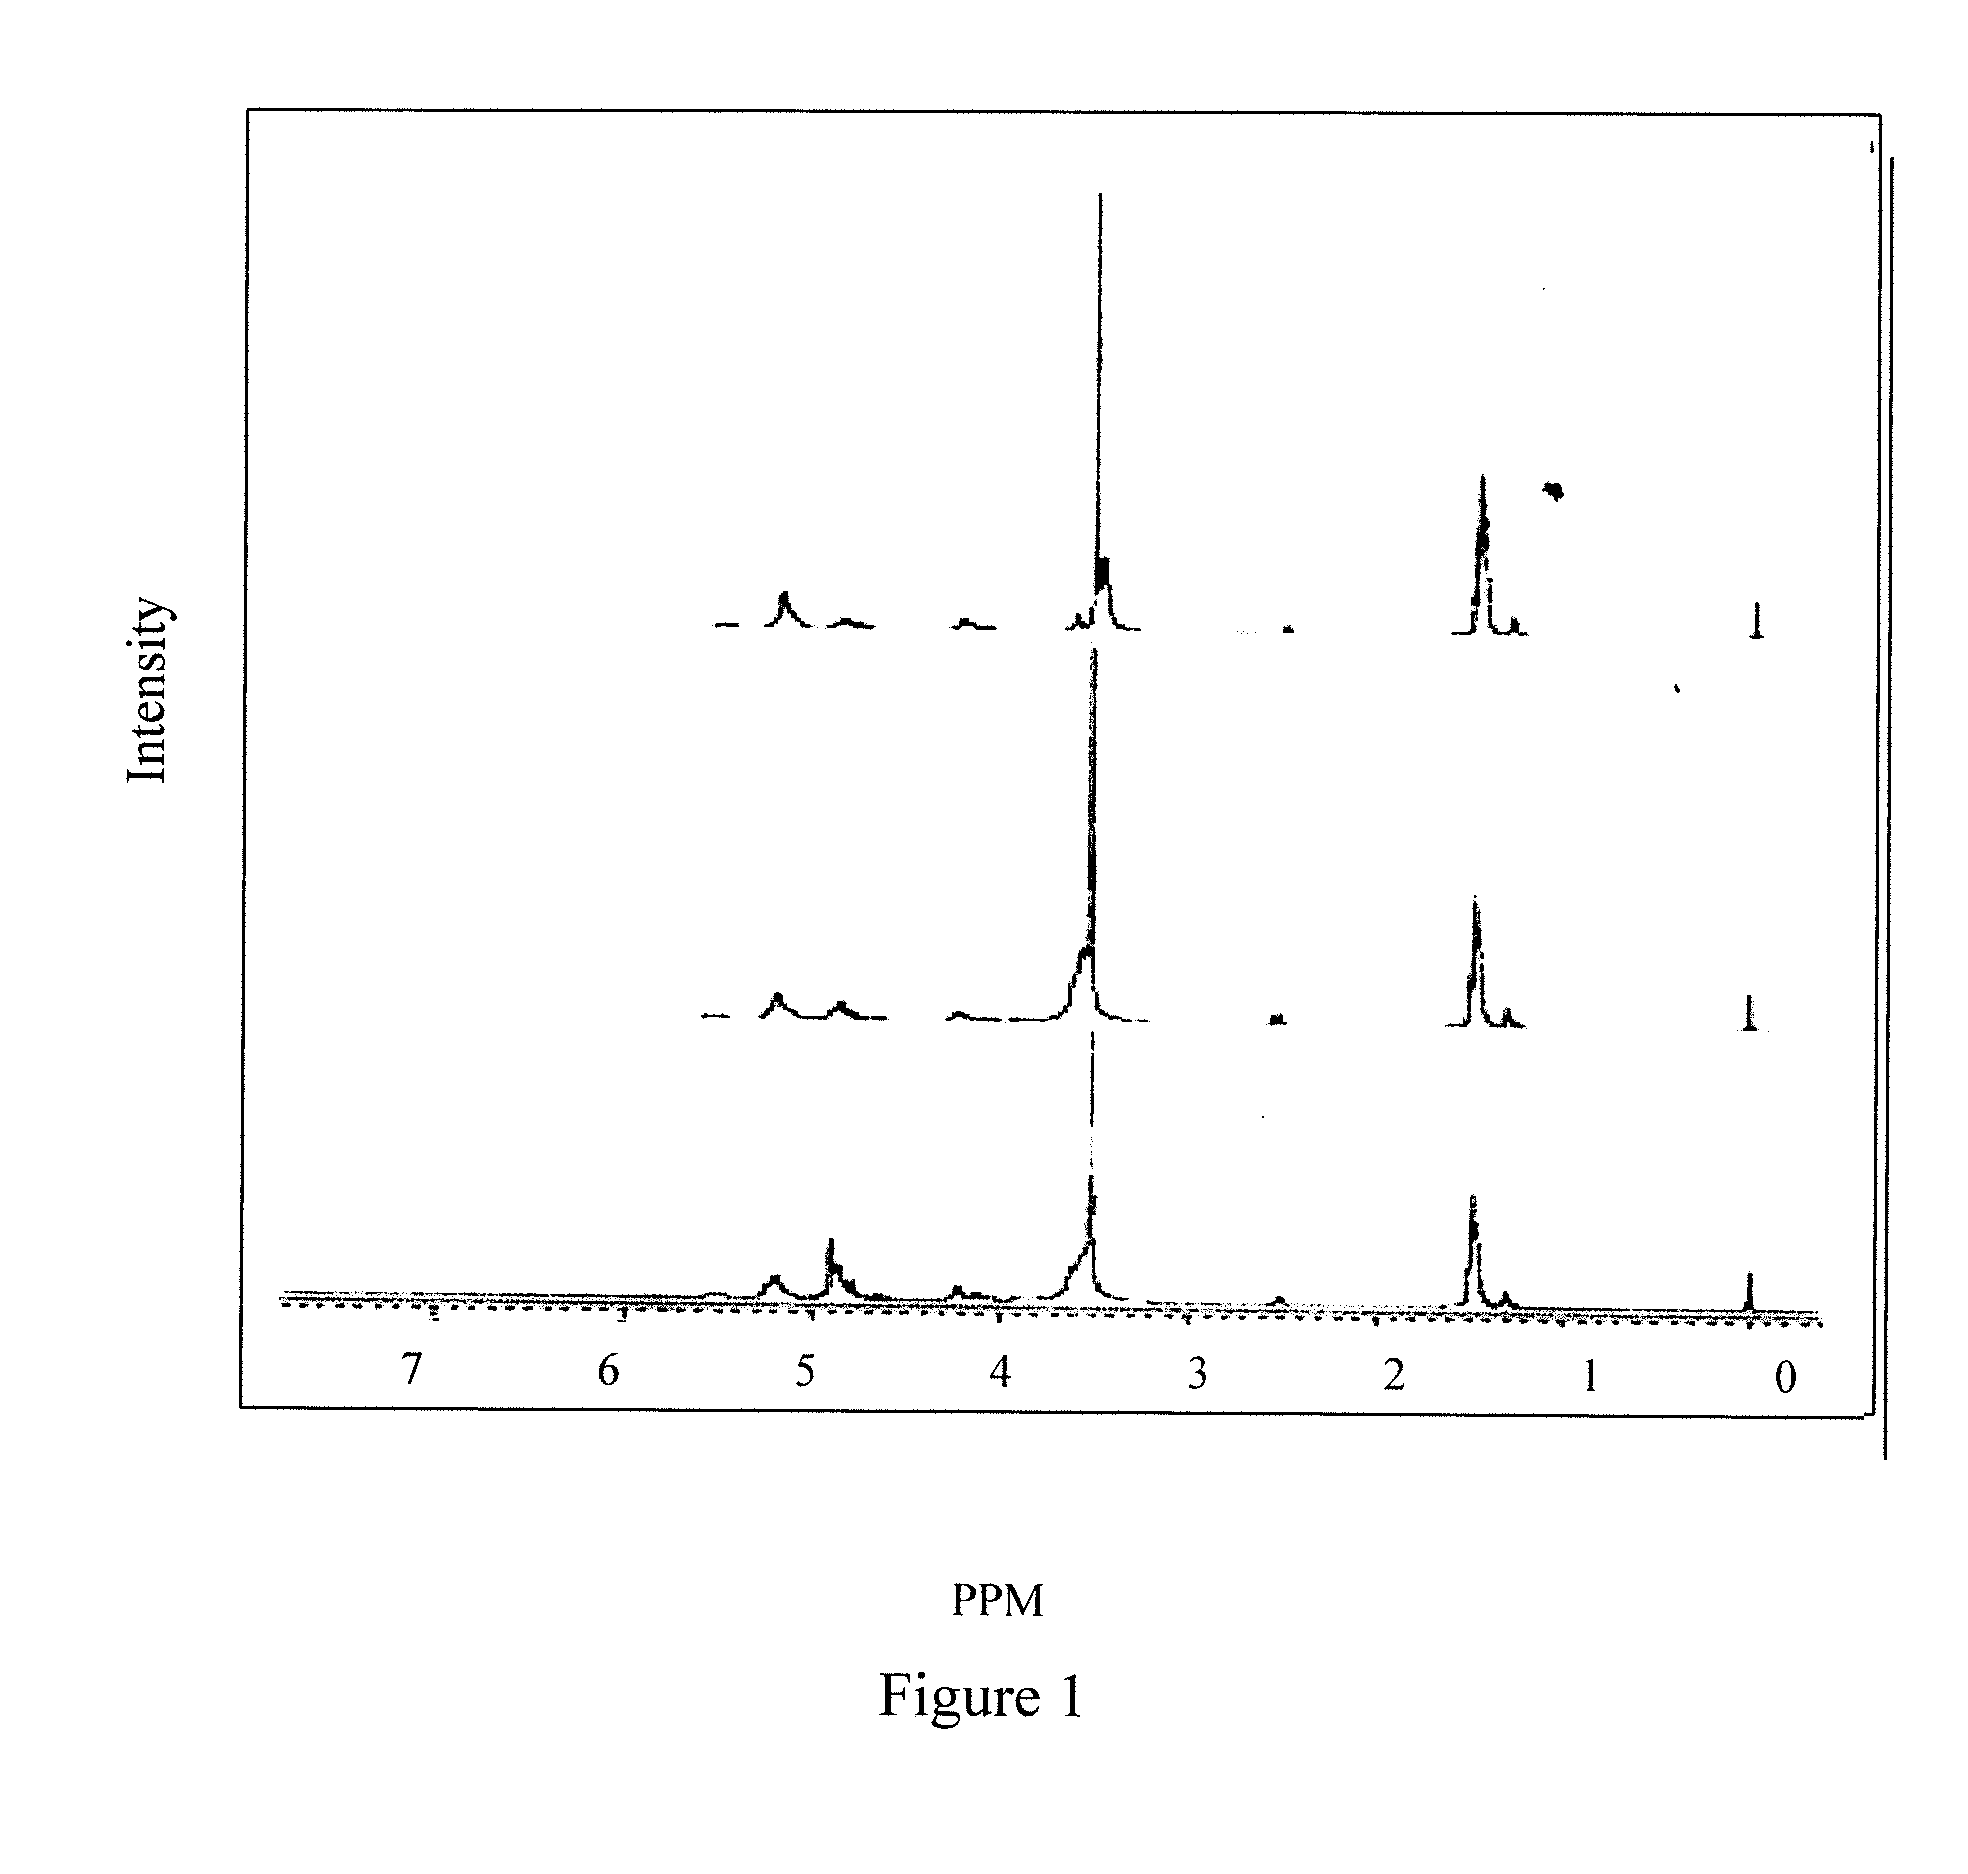 Method and composition for enhancing the delivery of Anti-platelet drugs for the treatment of acute stroke